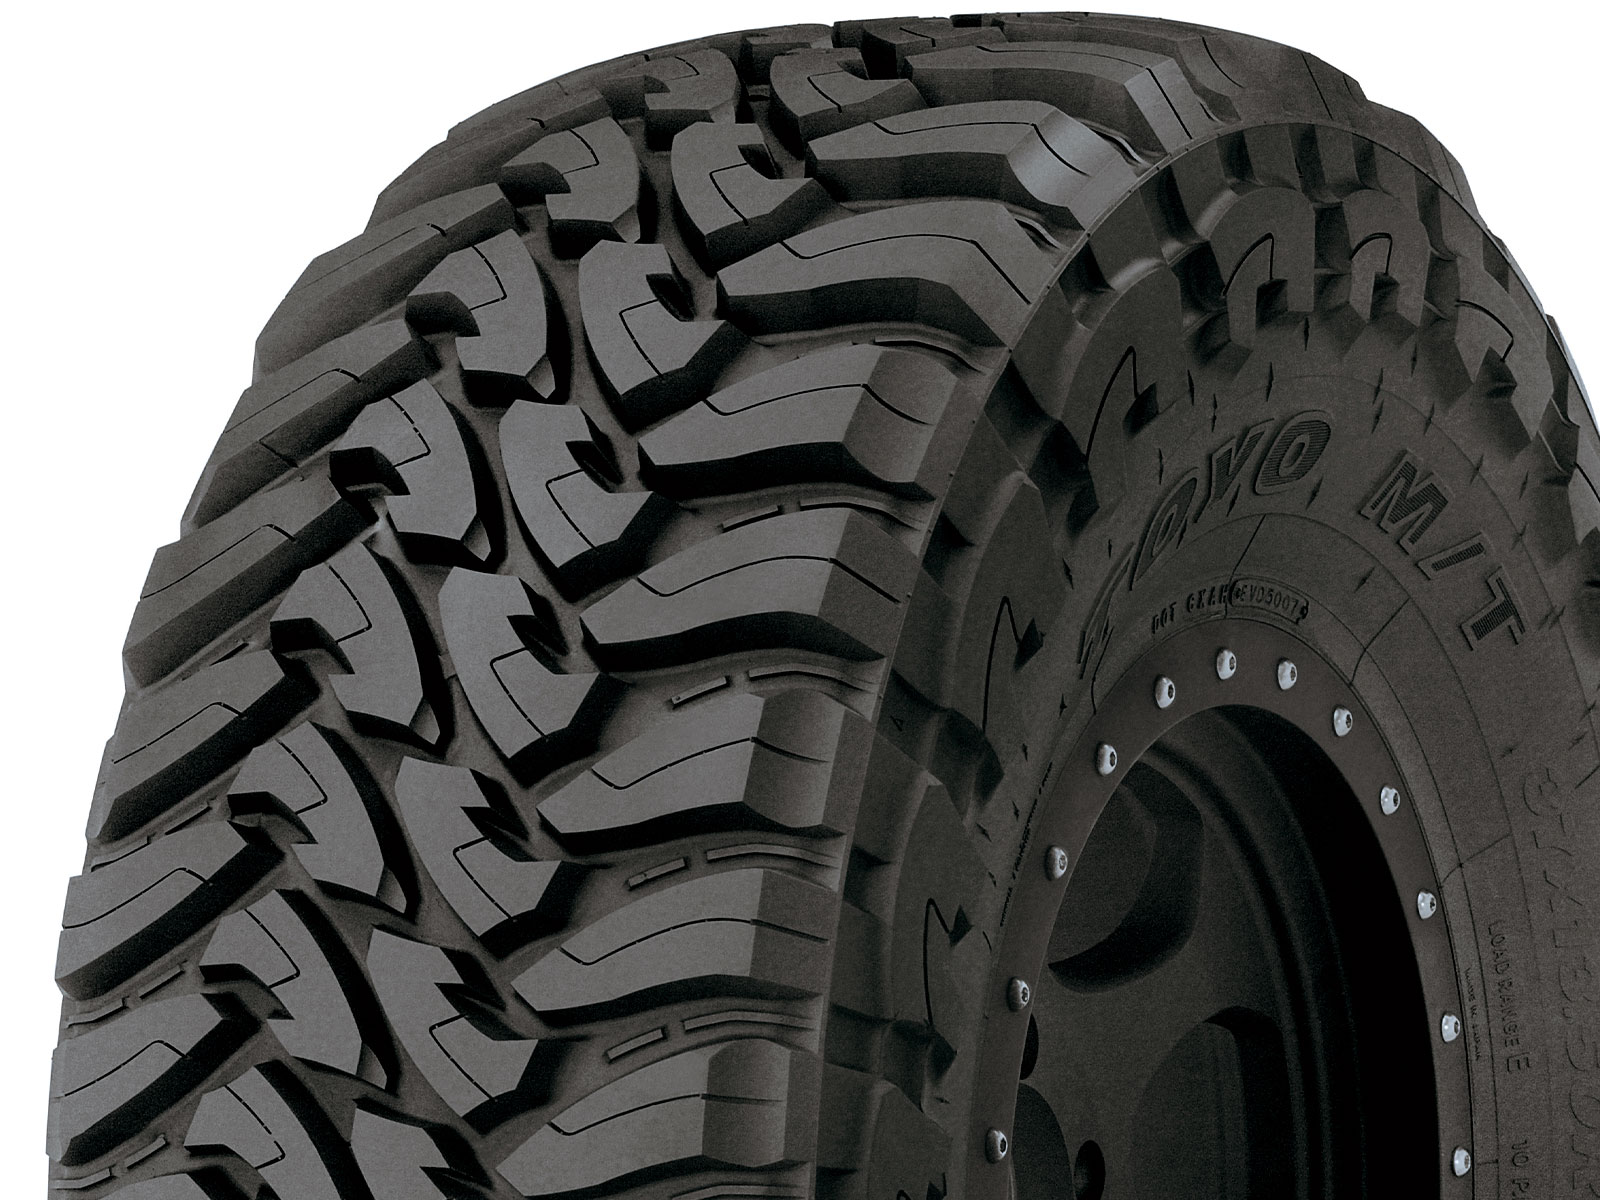 Toyo Open Country Tires, Toyo Open Country Buyer's Guide